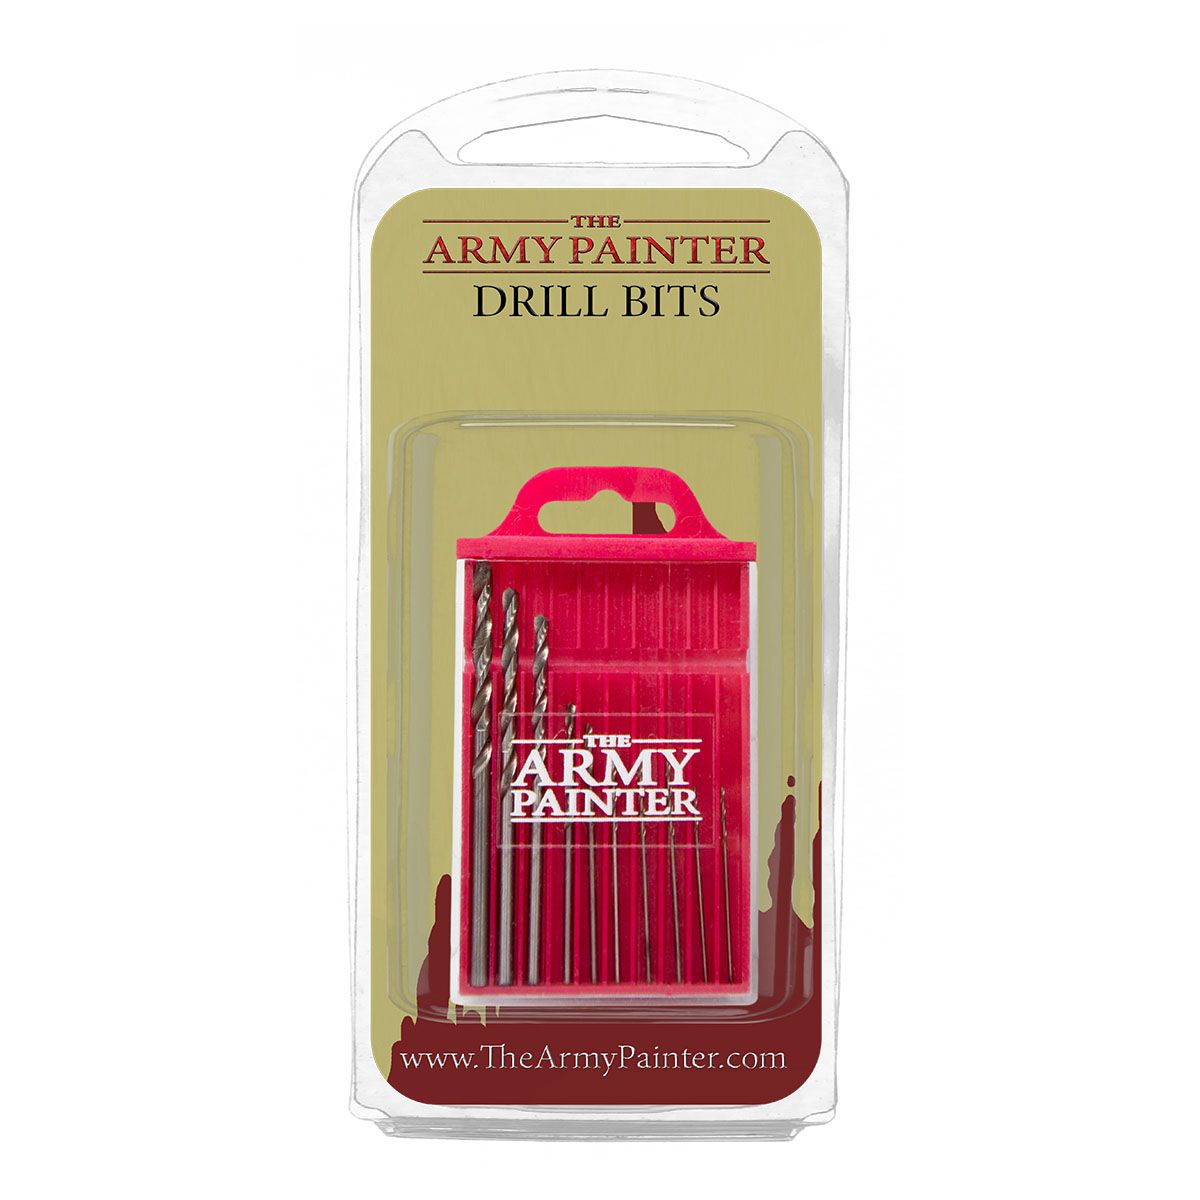 DRILL BITS - TL5042 - The Army Painter